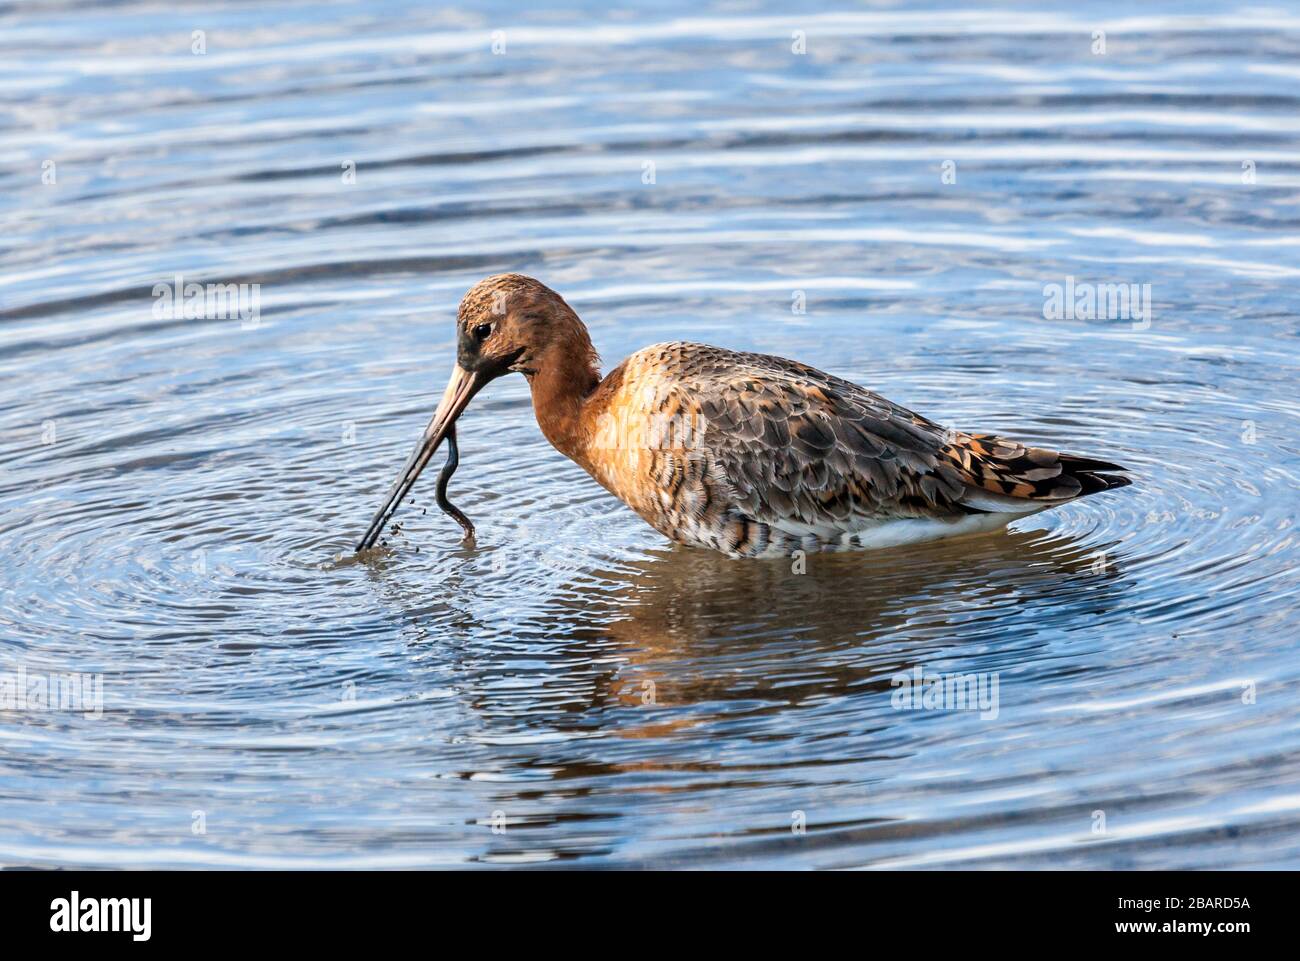 Carrigaline, Cork, Ireland. 29th March, 2020. A Black-Tailed Godwit wading in a pond in the town park in Carrigaline, Co. Cork, Ireland. - Credit; David Creedon / Alamy Live News Stock Photo